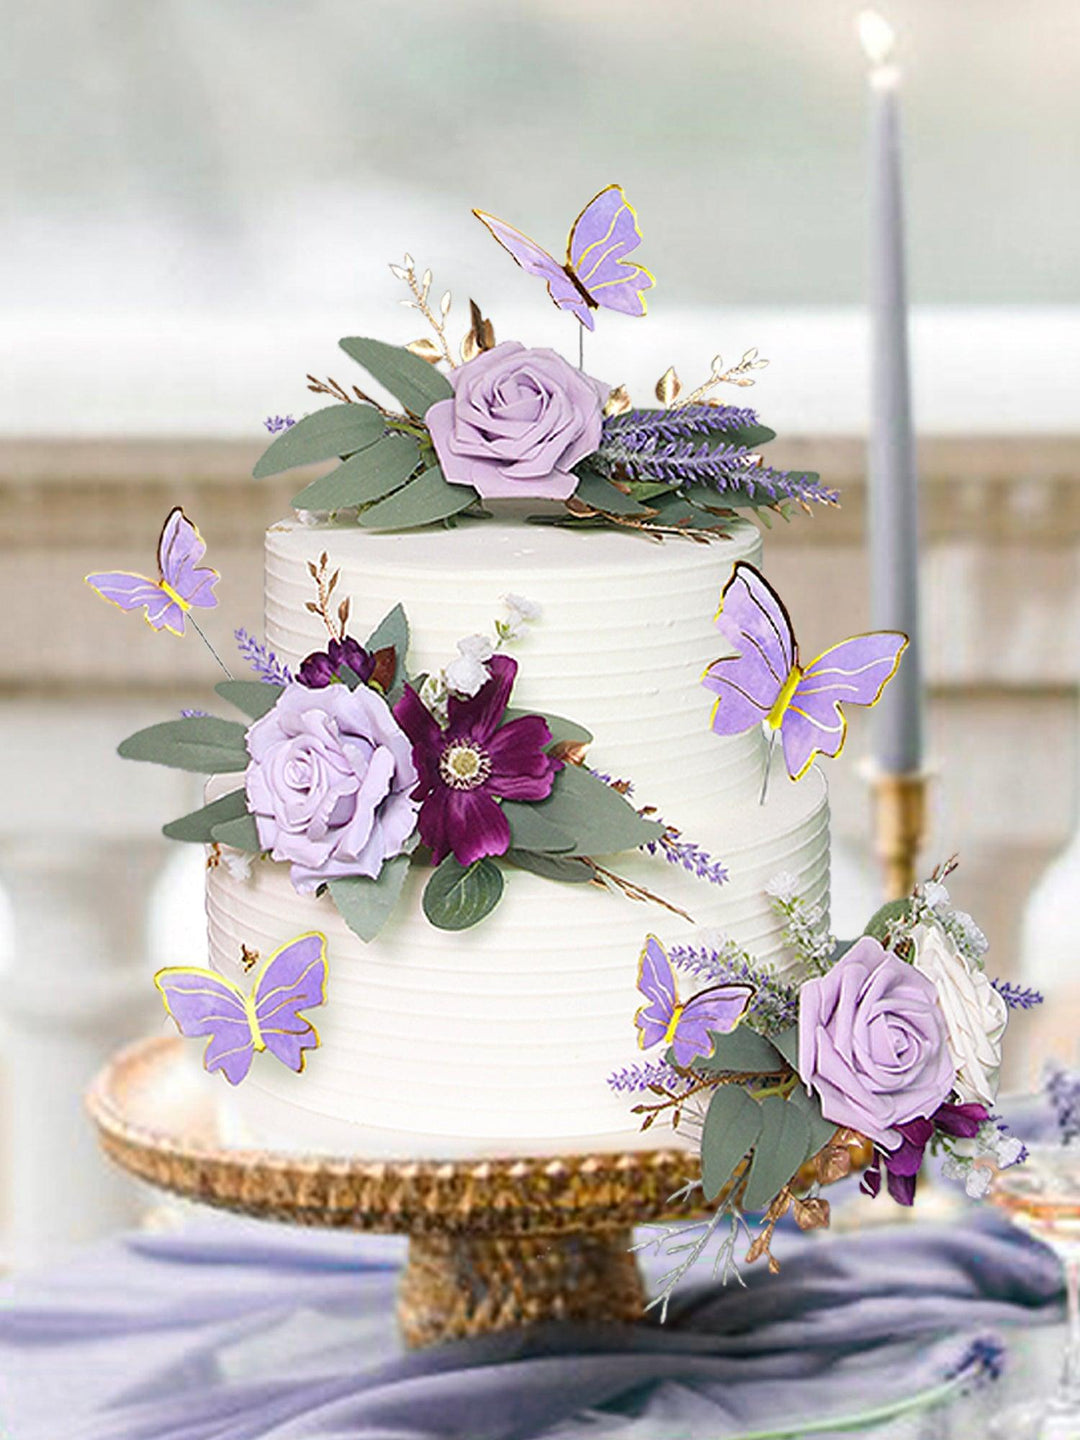 Unleashing Creativity in Your Wedding: A Closer Look at this Purple Cake Decorating Flowers